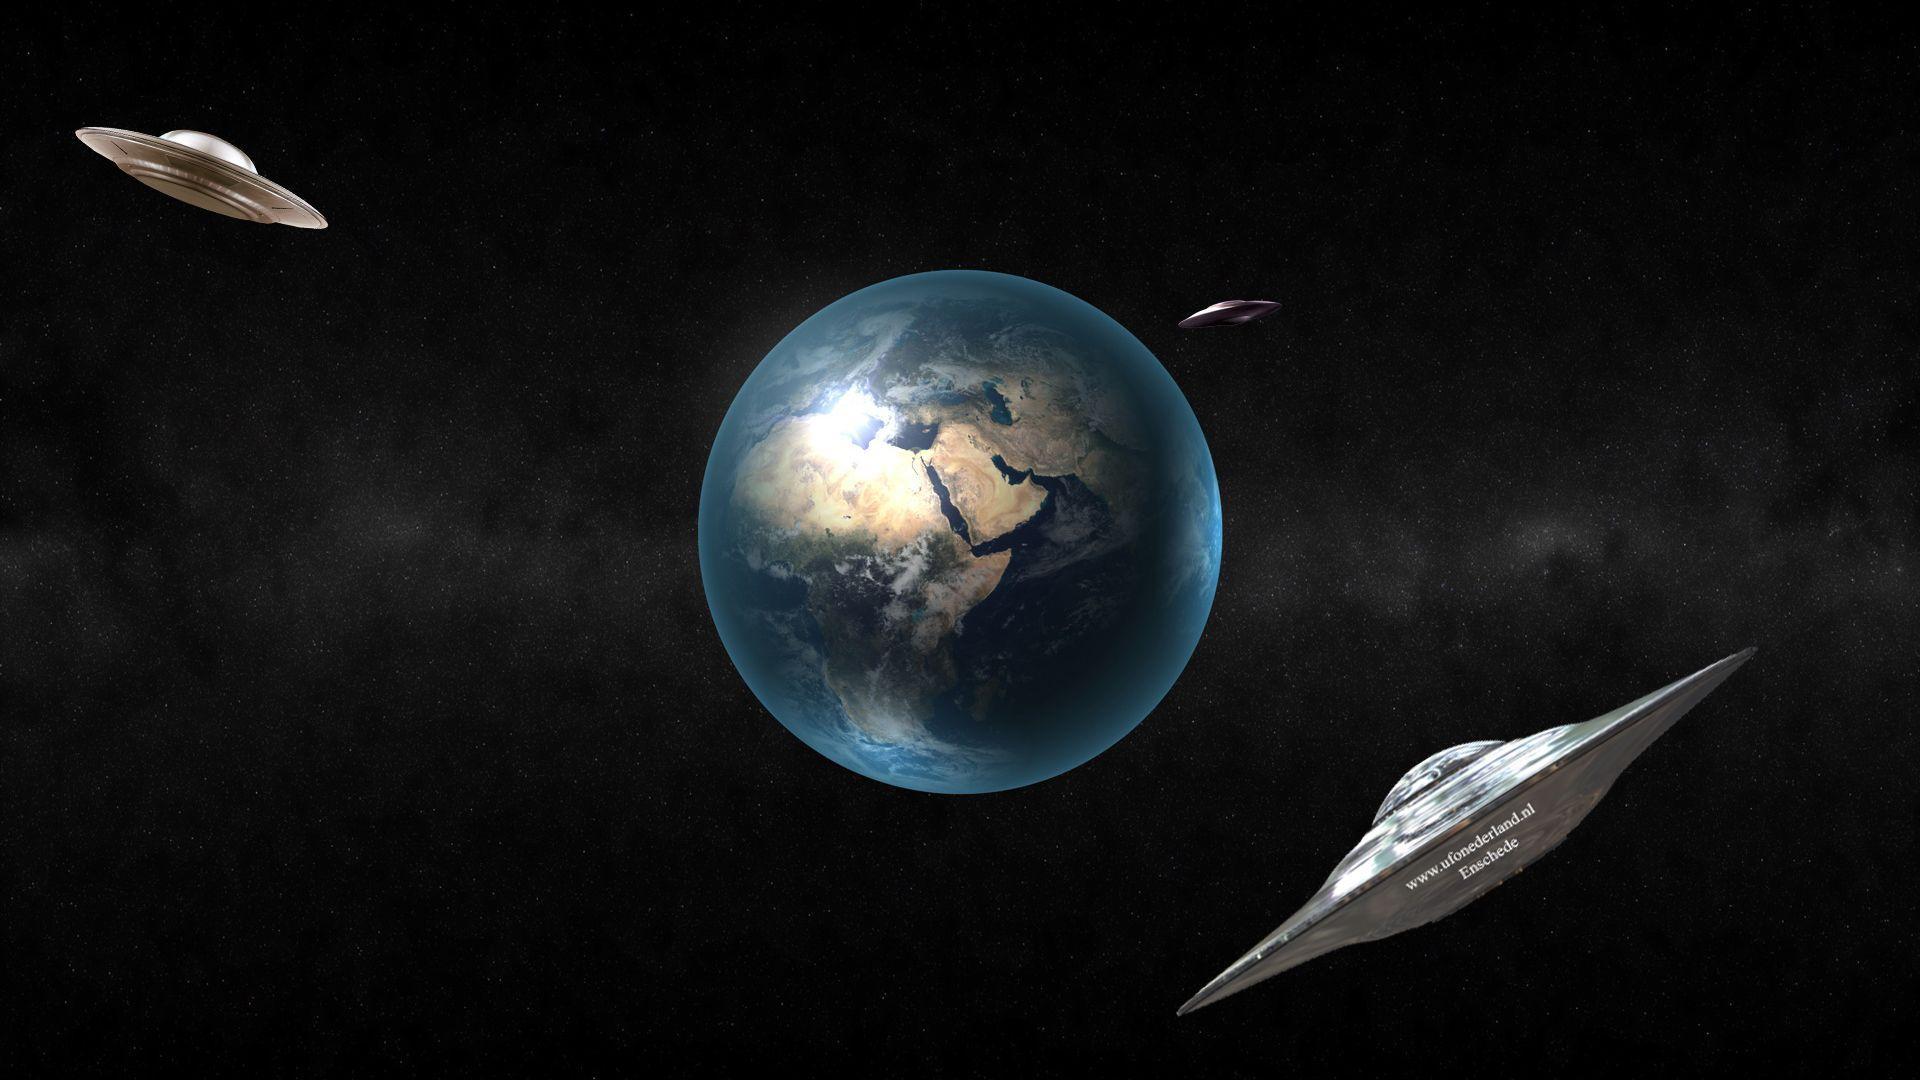 Wallpapers For > Ufo Wallpapers 1920x1080